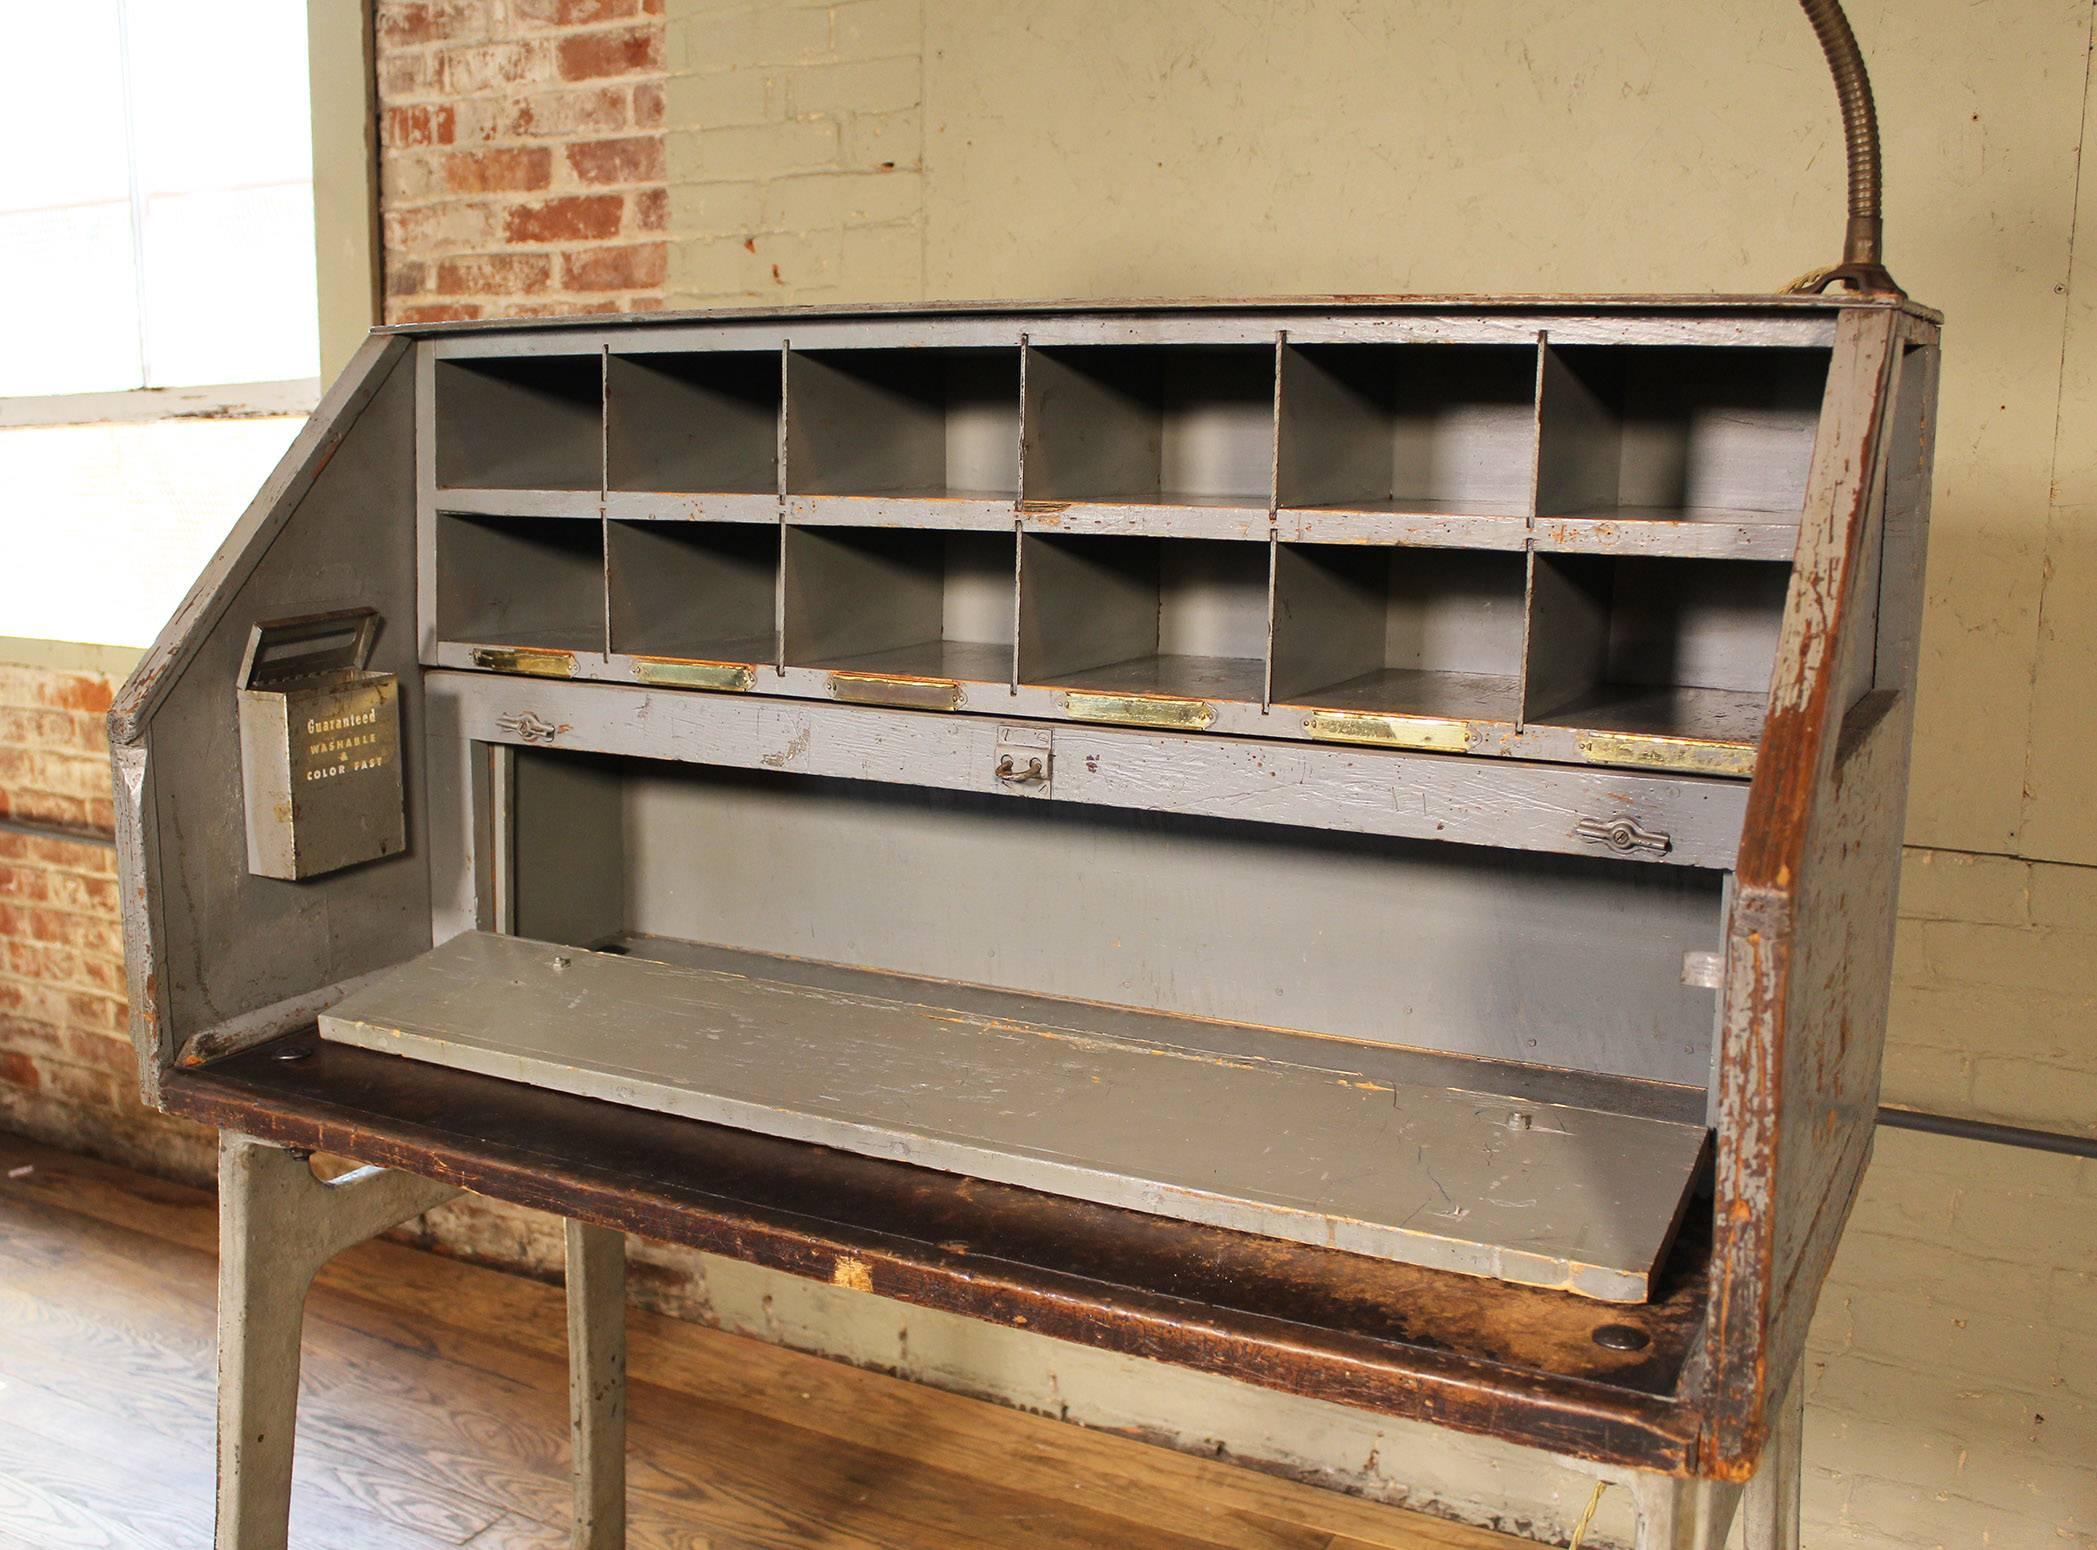 Vintage Industrial cast iron and wood foreman's shop desk. Includes adjustable goose neck lamp. Desk has 12 cubby holes and a fold down lockable shelf for storage. Desk work area measures 38 1/4" x 11 1/4 x 33" tall. 31 3/4" to